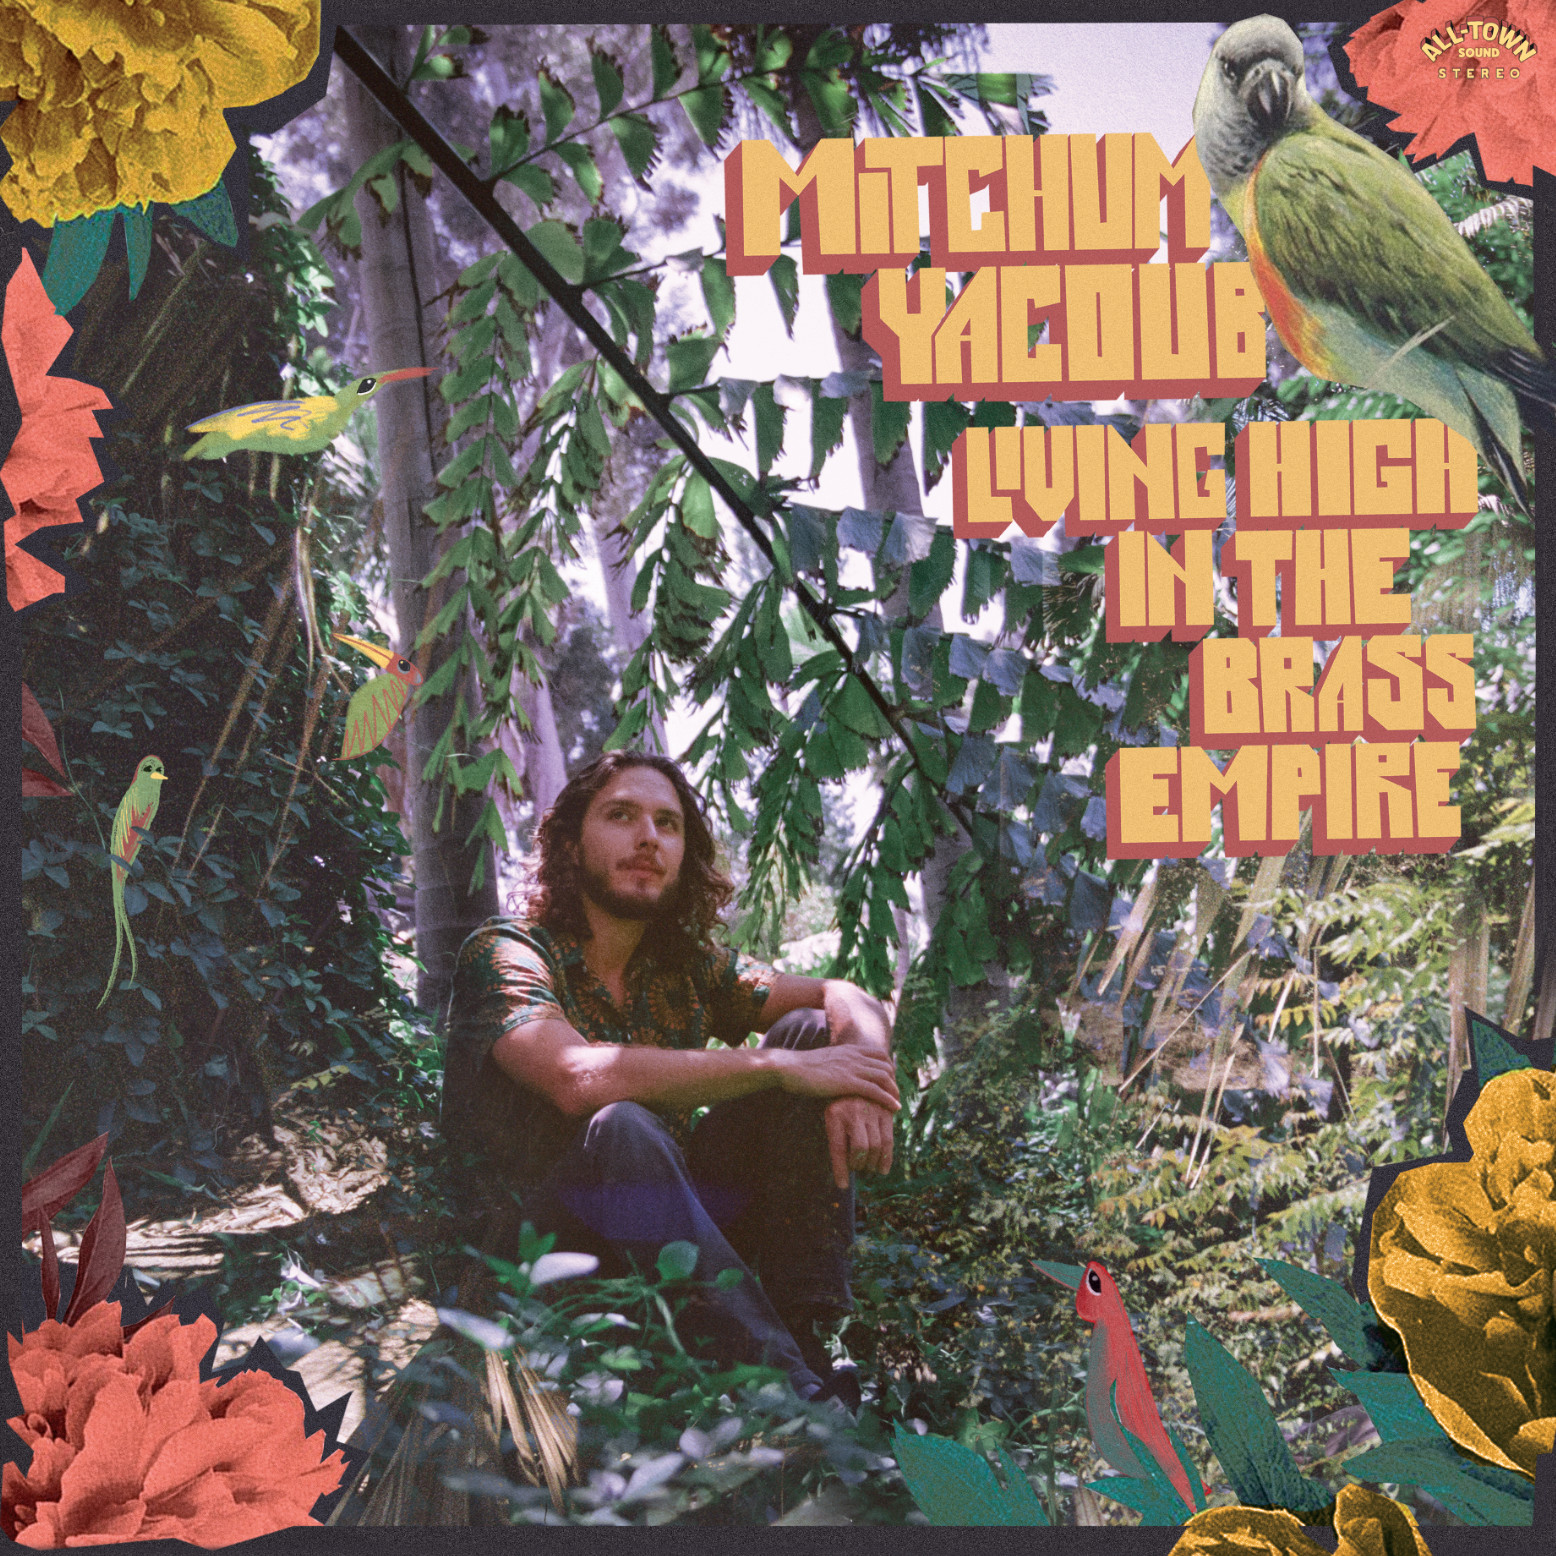 Mitchum Yacoub - Living High in the Brass Empire : LP+DL